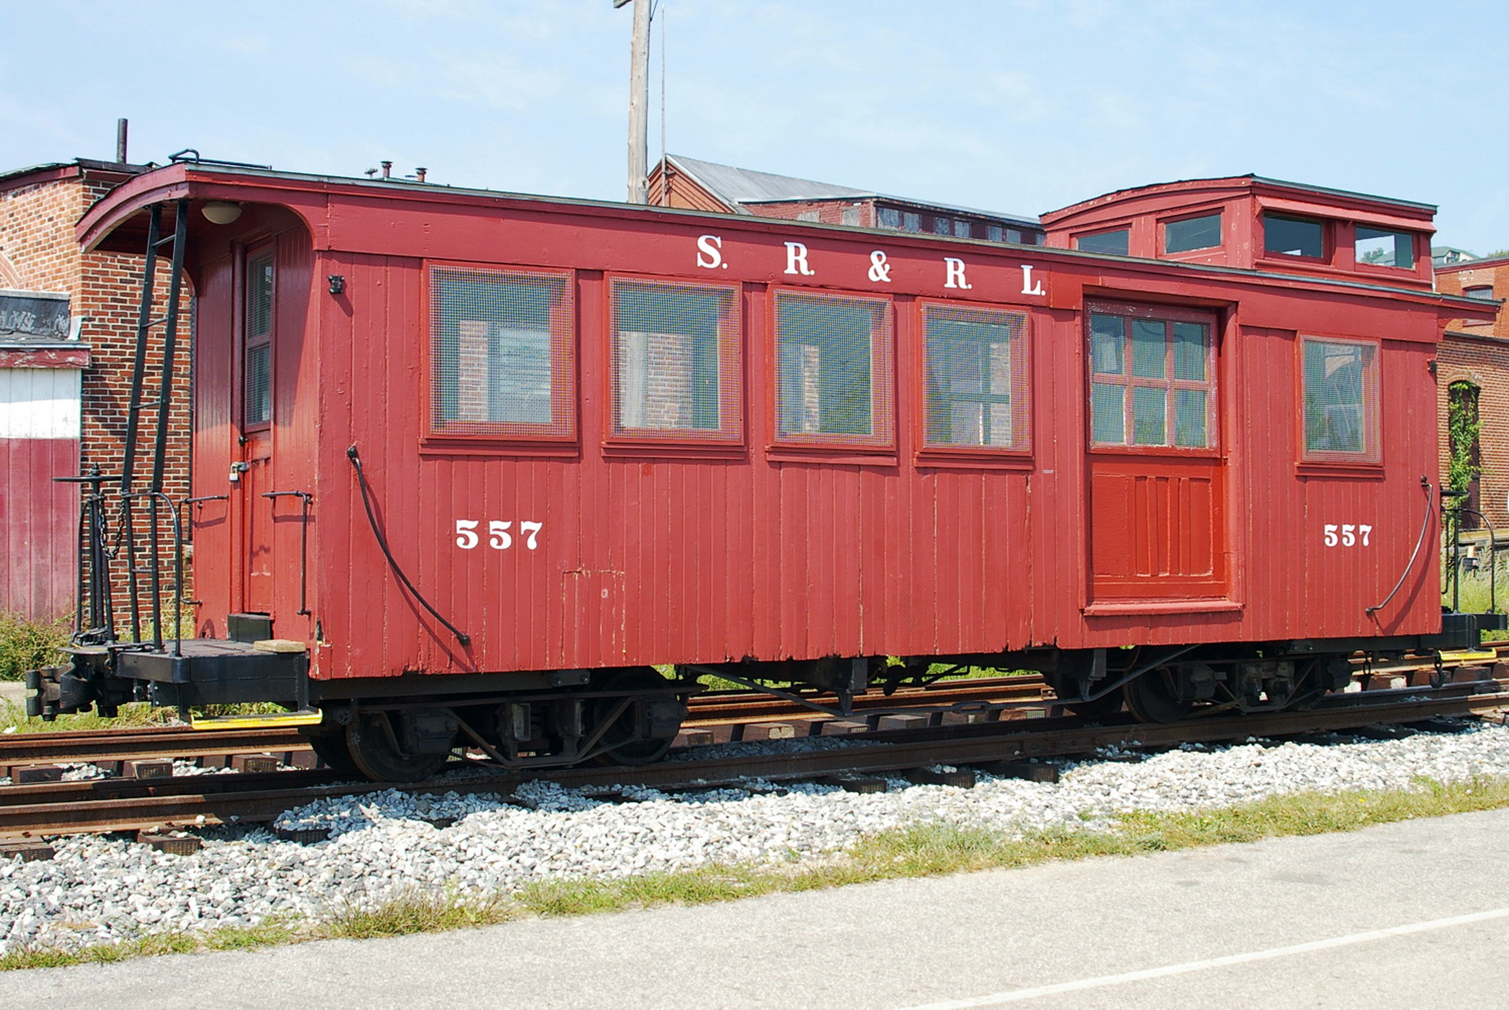 This photo is Sandy River & Rangely Lakes caboose # 557.